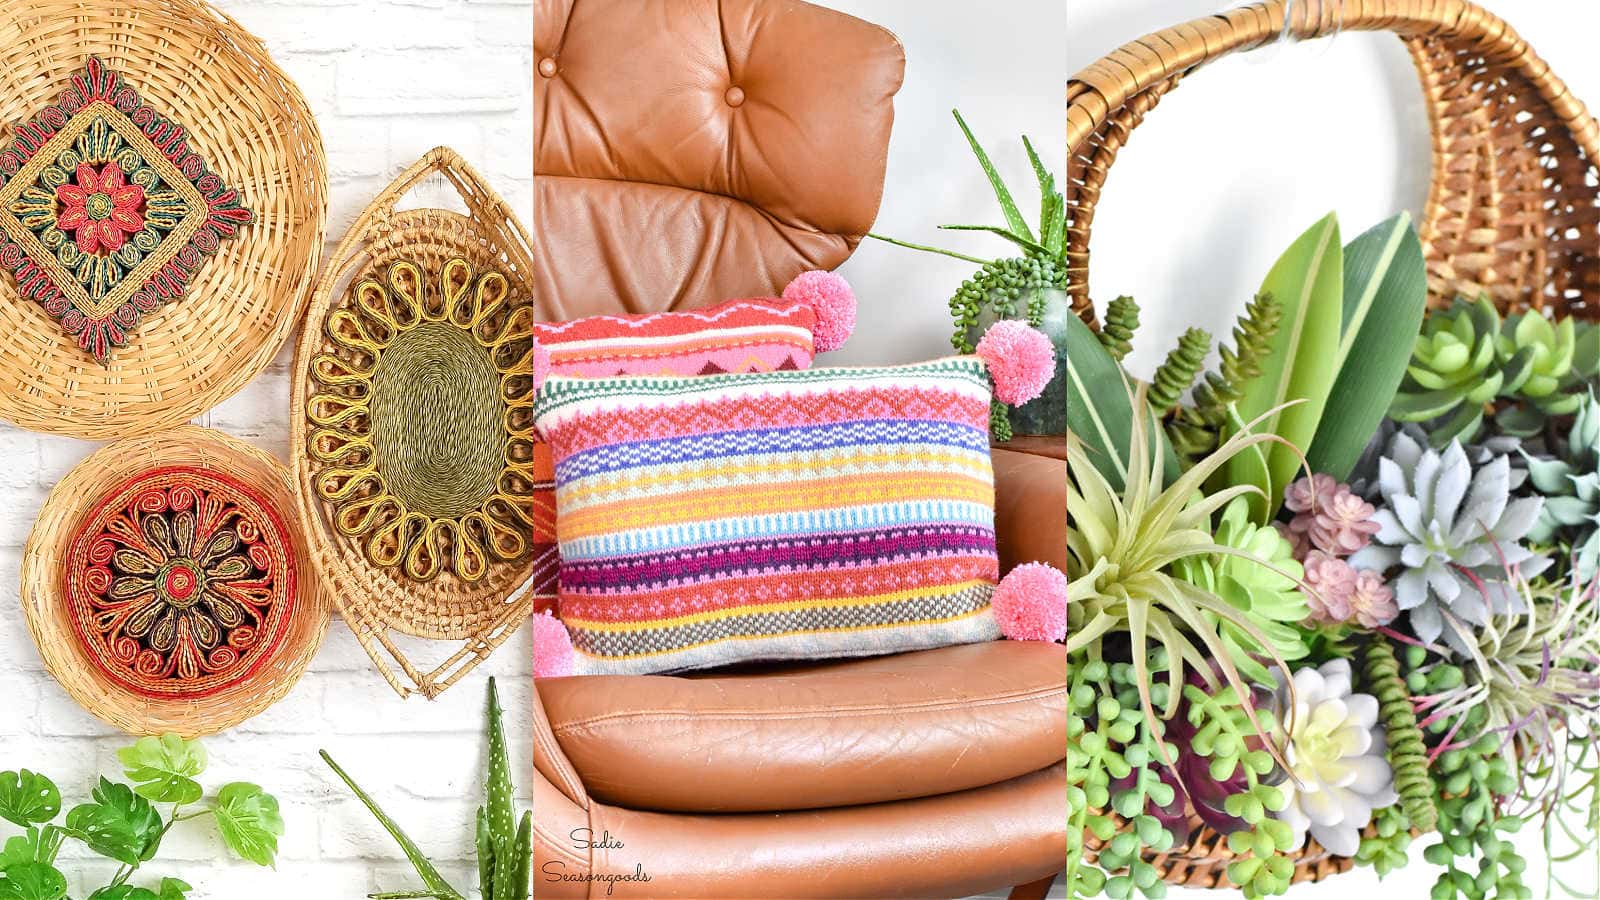 Boho Decor Projects for a Vibrant Home